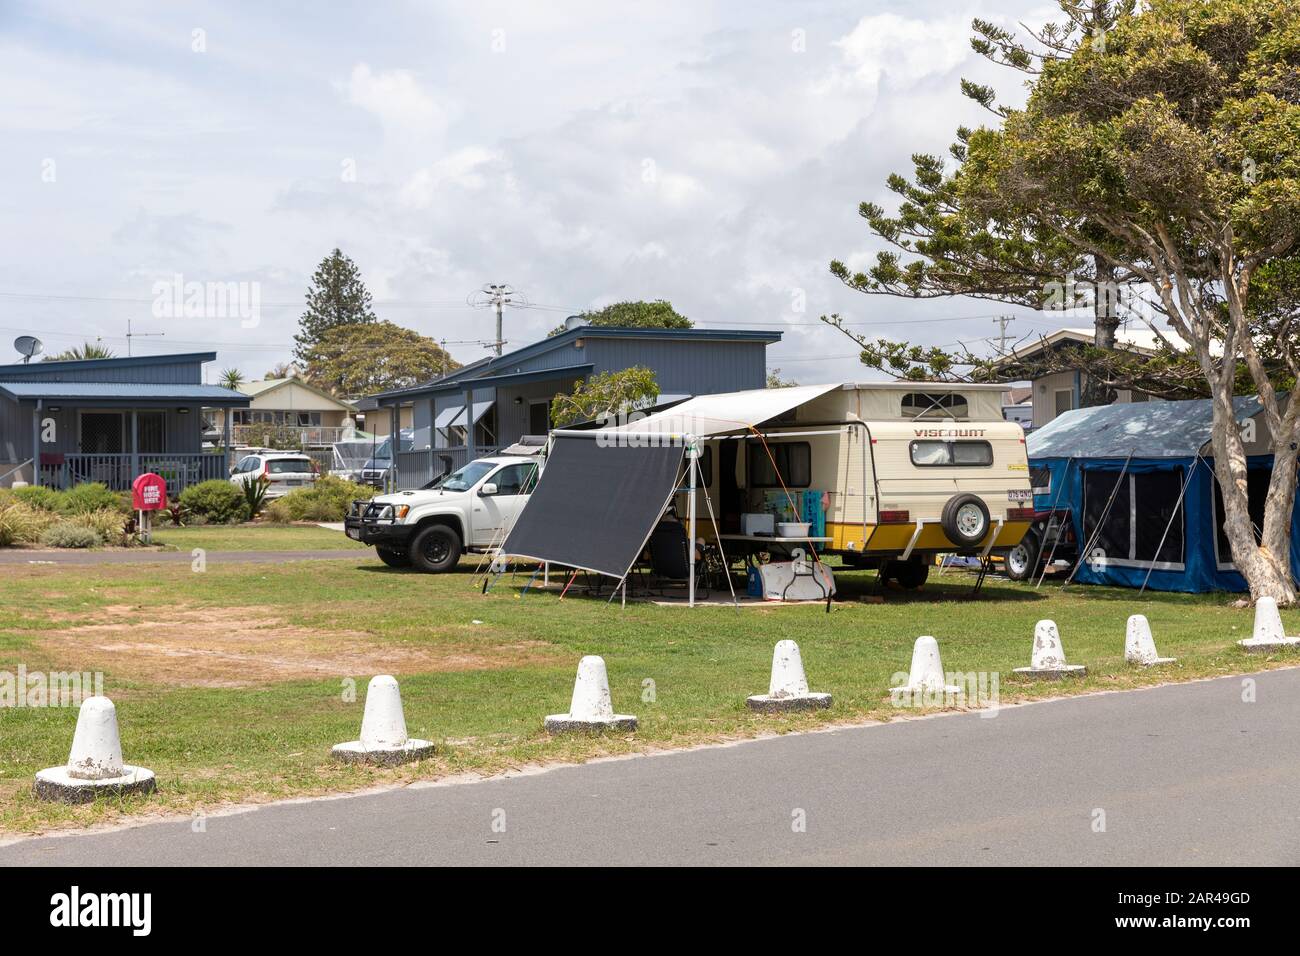 Caravan and camping site at Lennox Head in Northern New South Wales,Australia,2020 Stock Photo